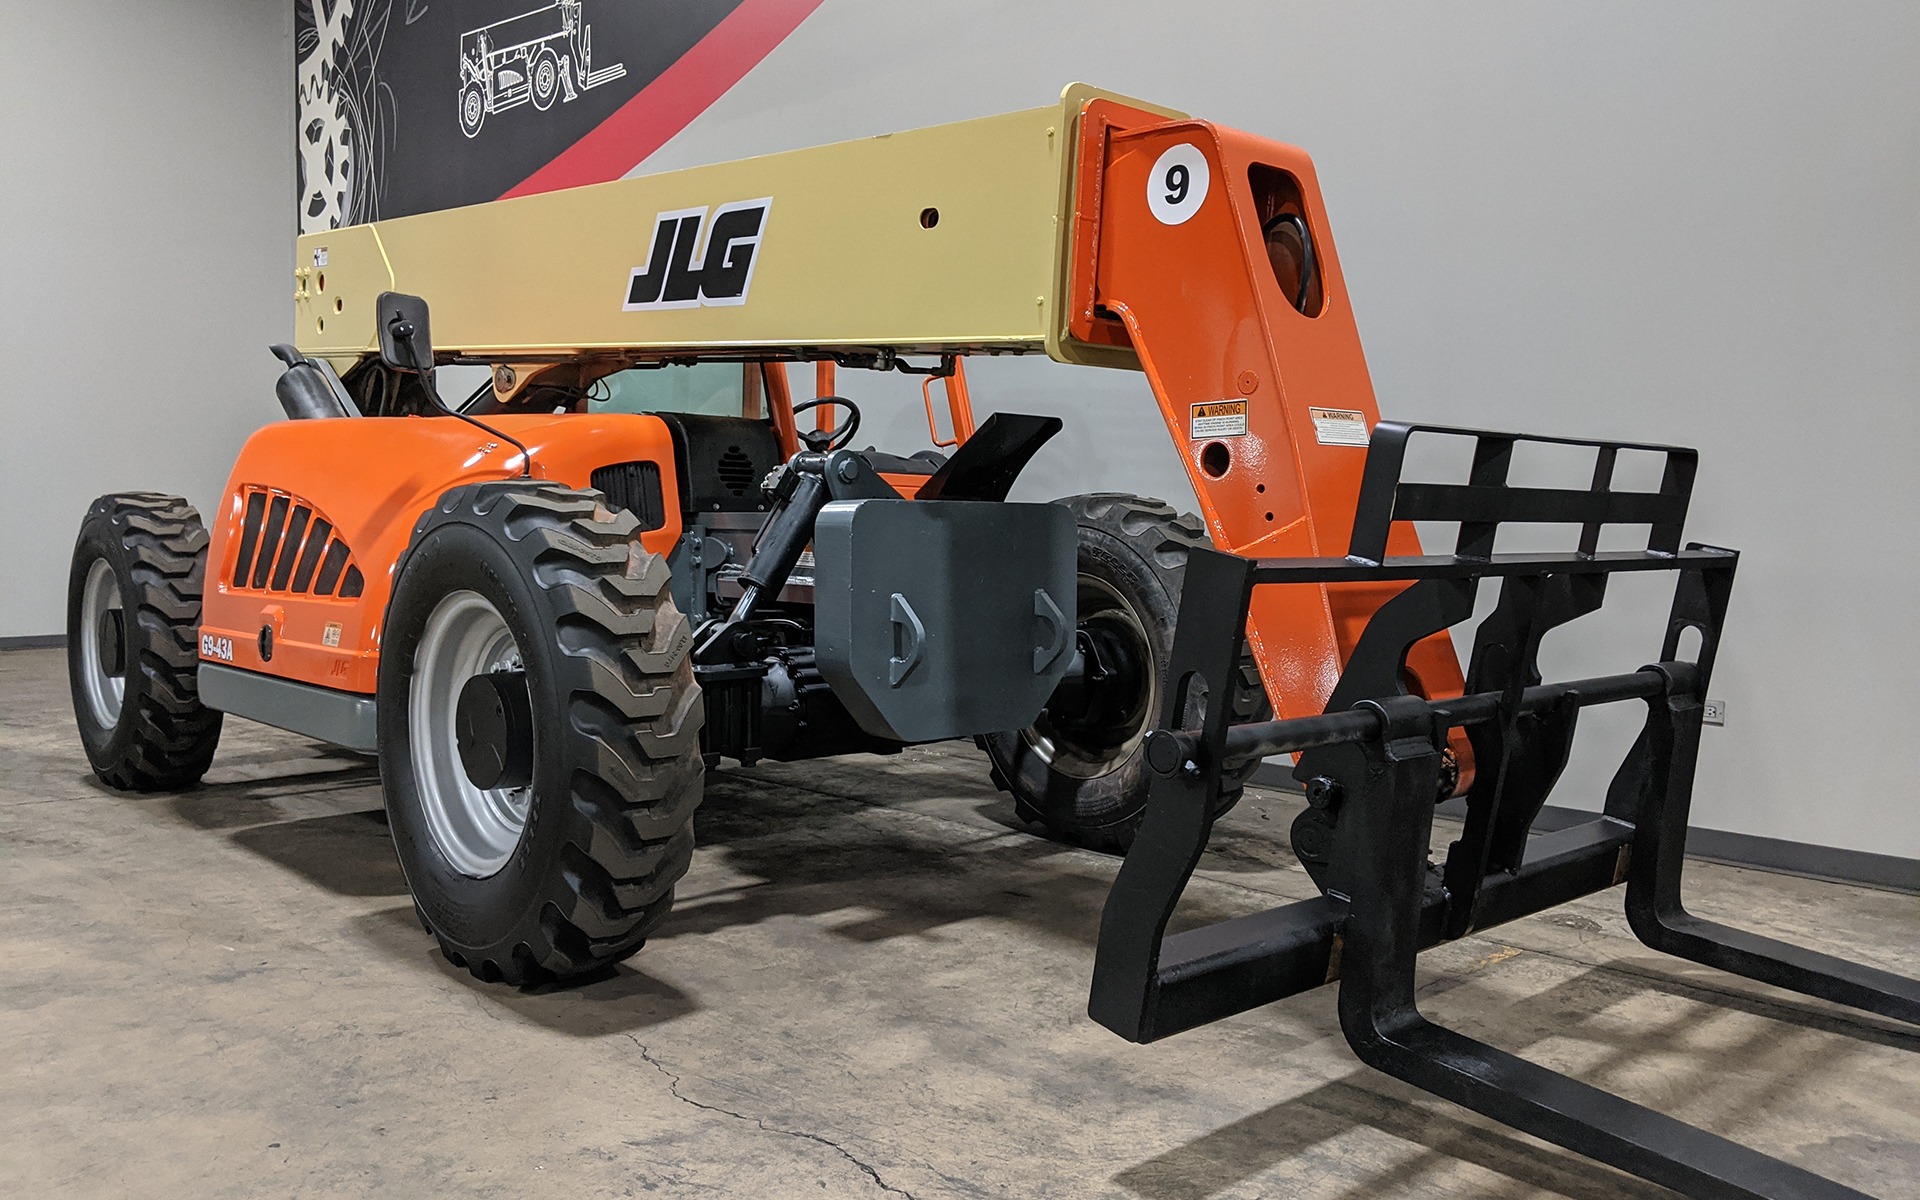 Used 2007 JLG G9-43A  | Cary, IL